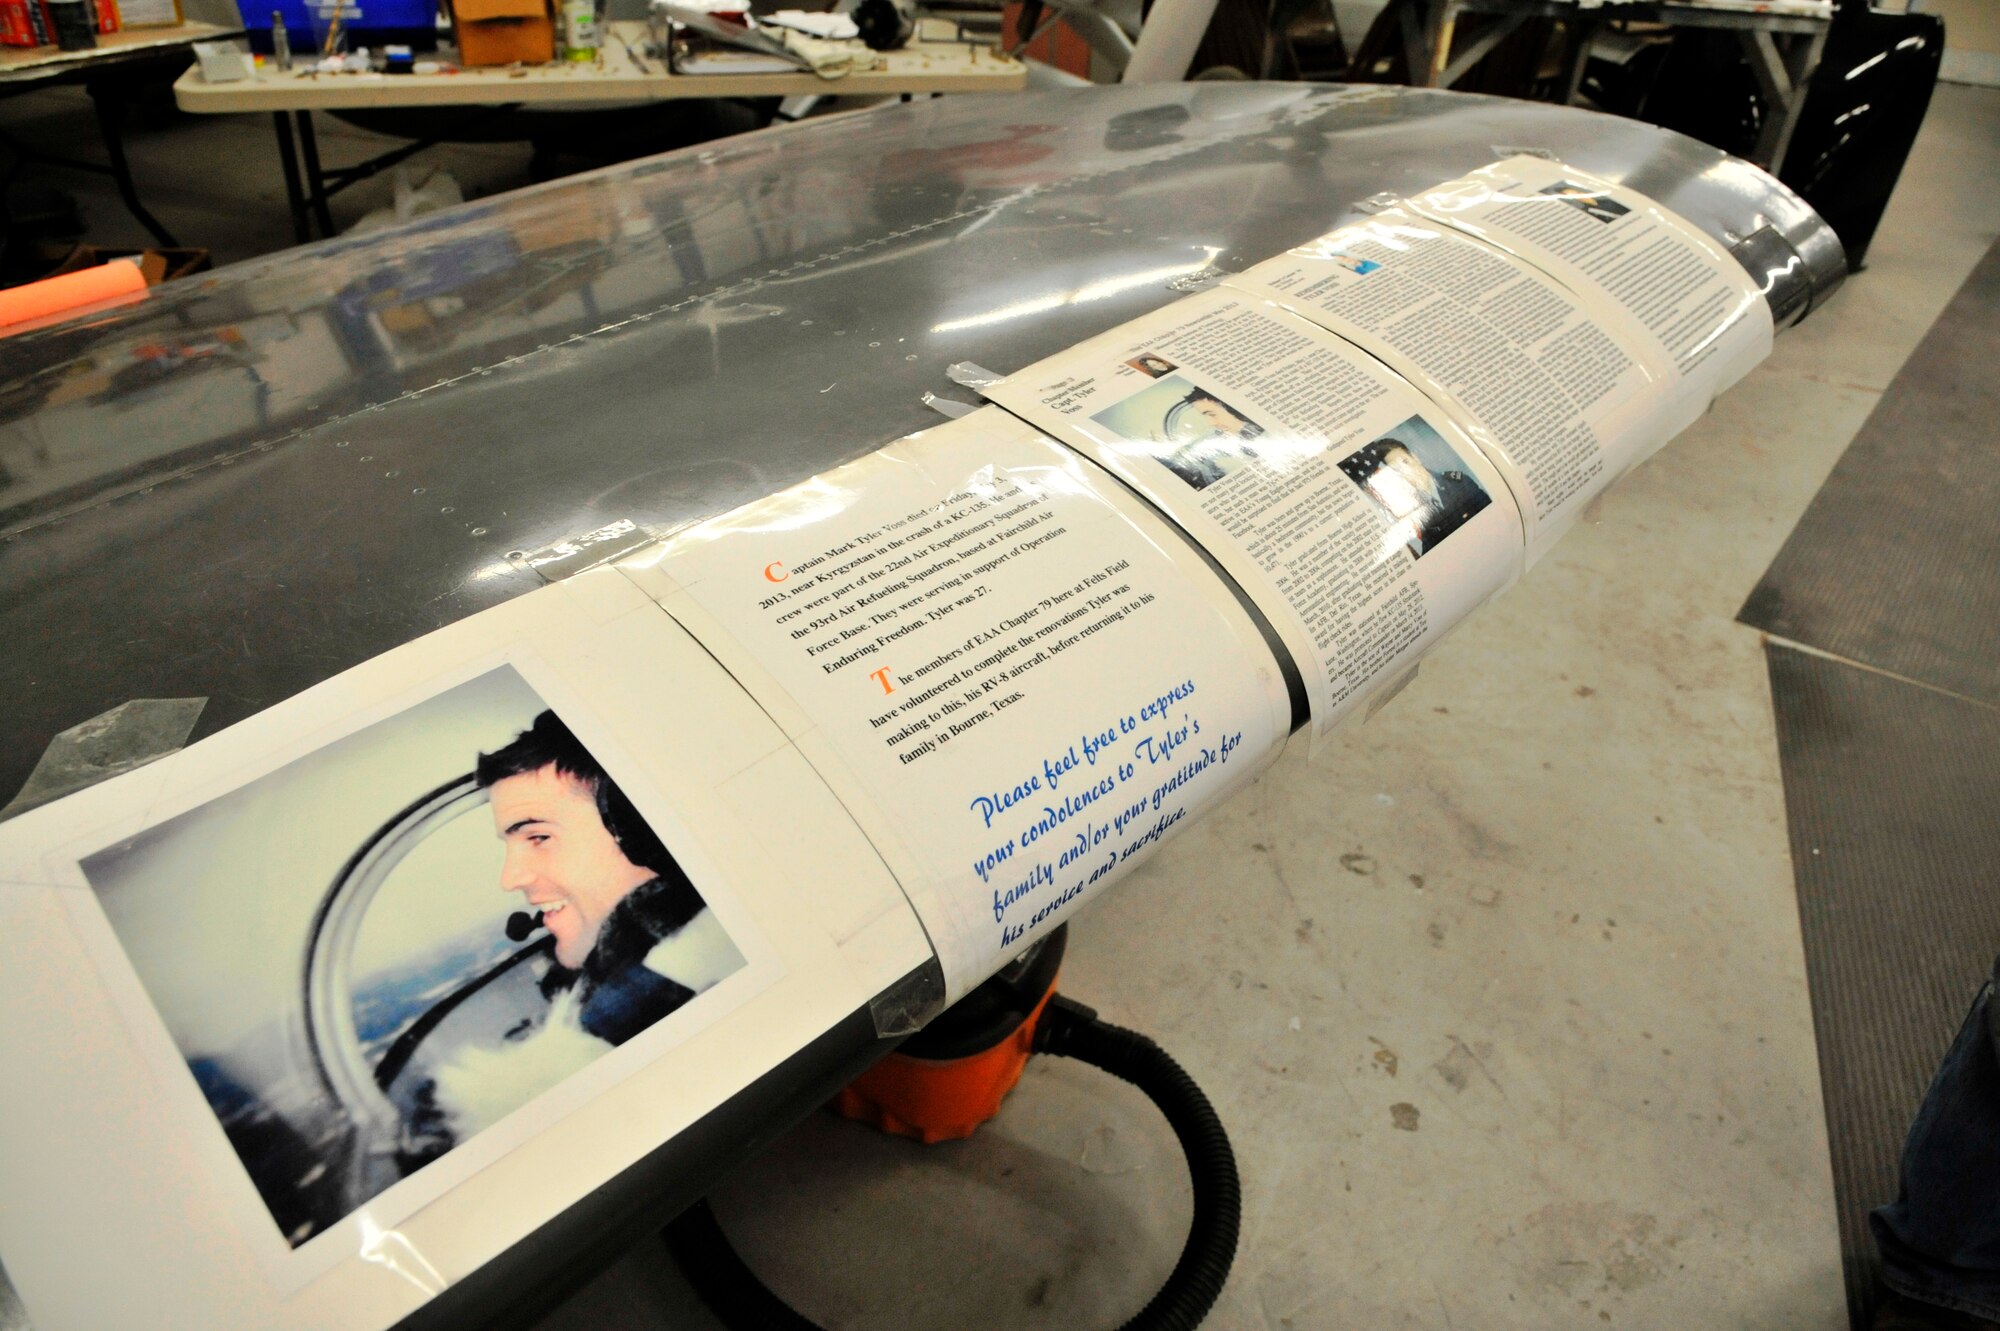 Laminated papers describing the life of fallen Airman, Capt. Tyler Voss, are taped to the wing of an RV-8 aircraft being rebuilt by Staff Sgt. Matthew Perroux in Voss’s memory at a maintenance hangar at Felts Field in Spokane, Wash., Feb. 22, 2014. Perroux is a 373rd detachment aircraft maintenance instructor and Voss was a 93rd Air Refueling Squadron crew member who lost his life in a tragic KC-135 Stratotanker crash May 3, 2013, near Chon-Aryk, Kyrgyzstan. (U.S. Air Force photo by Senior Airman Mary O’Dell/Released)